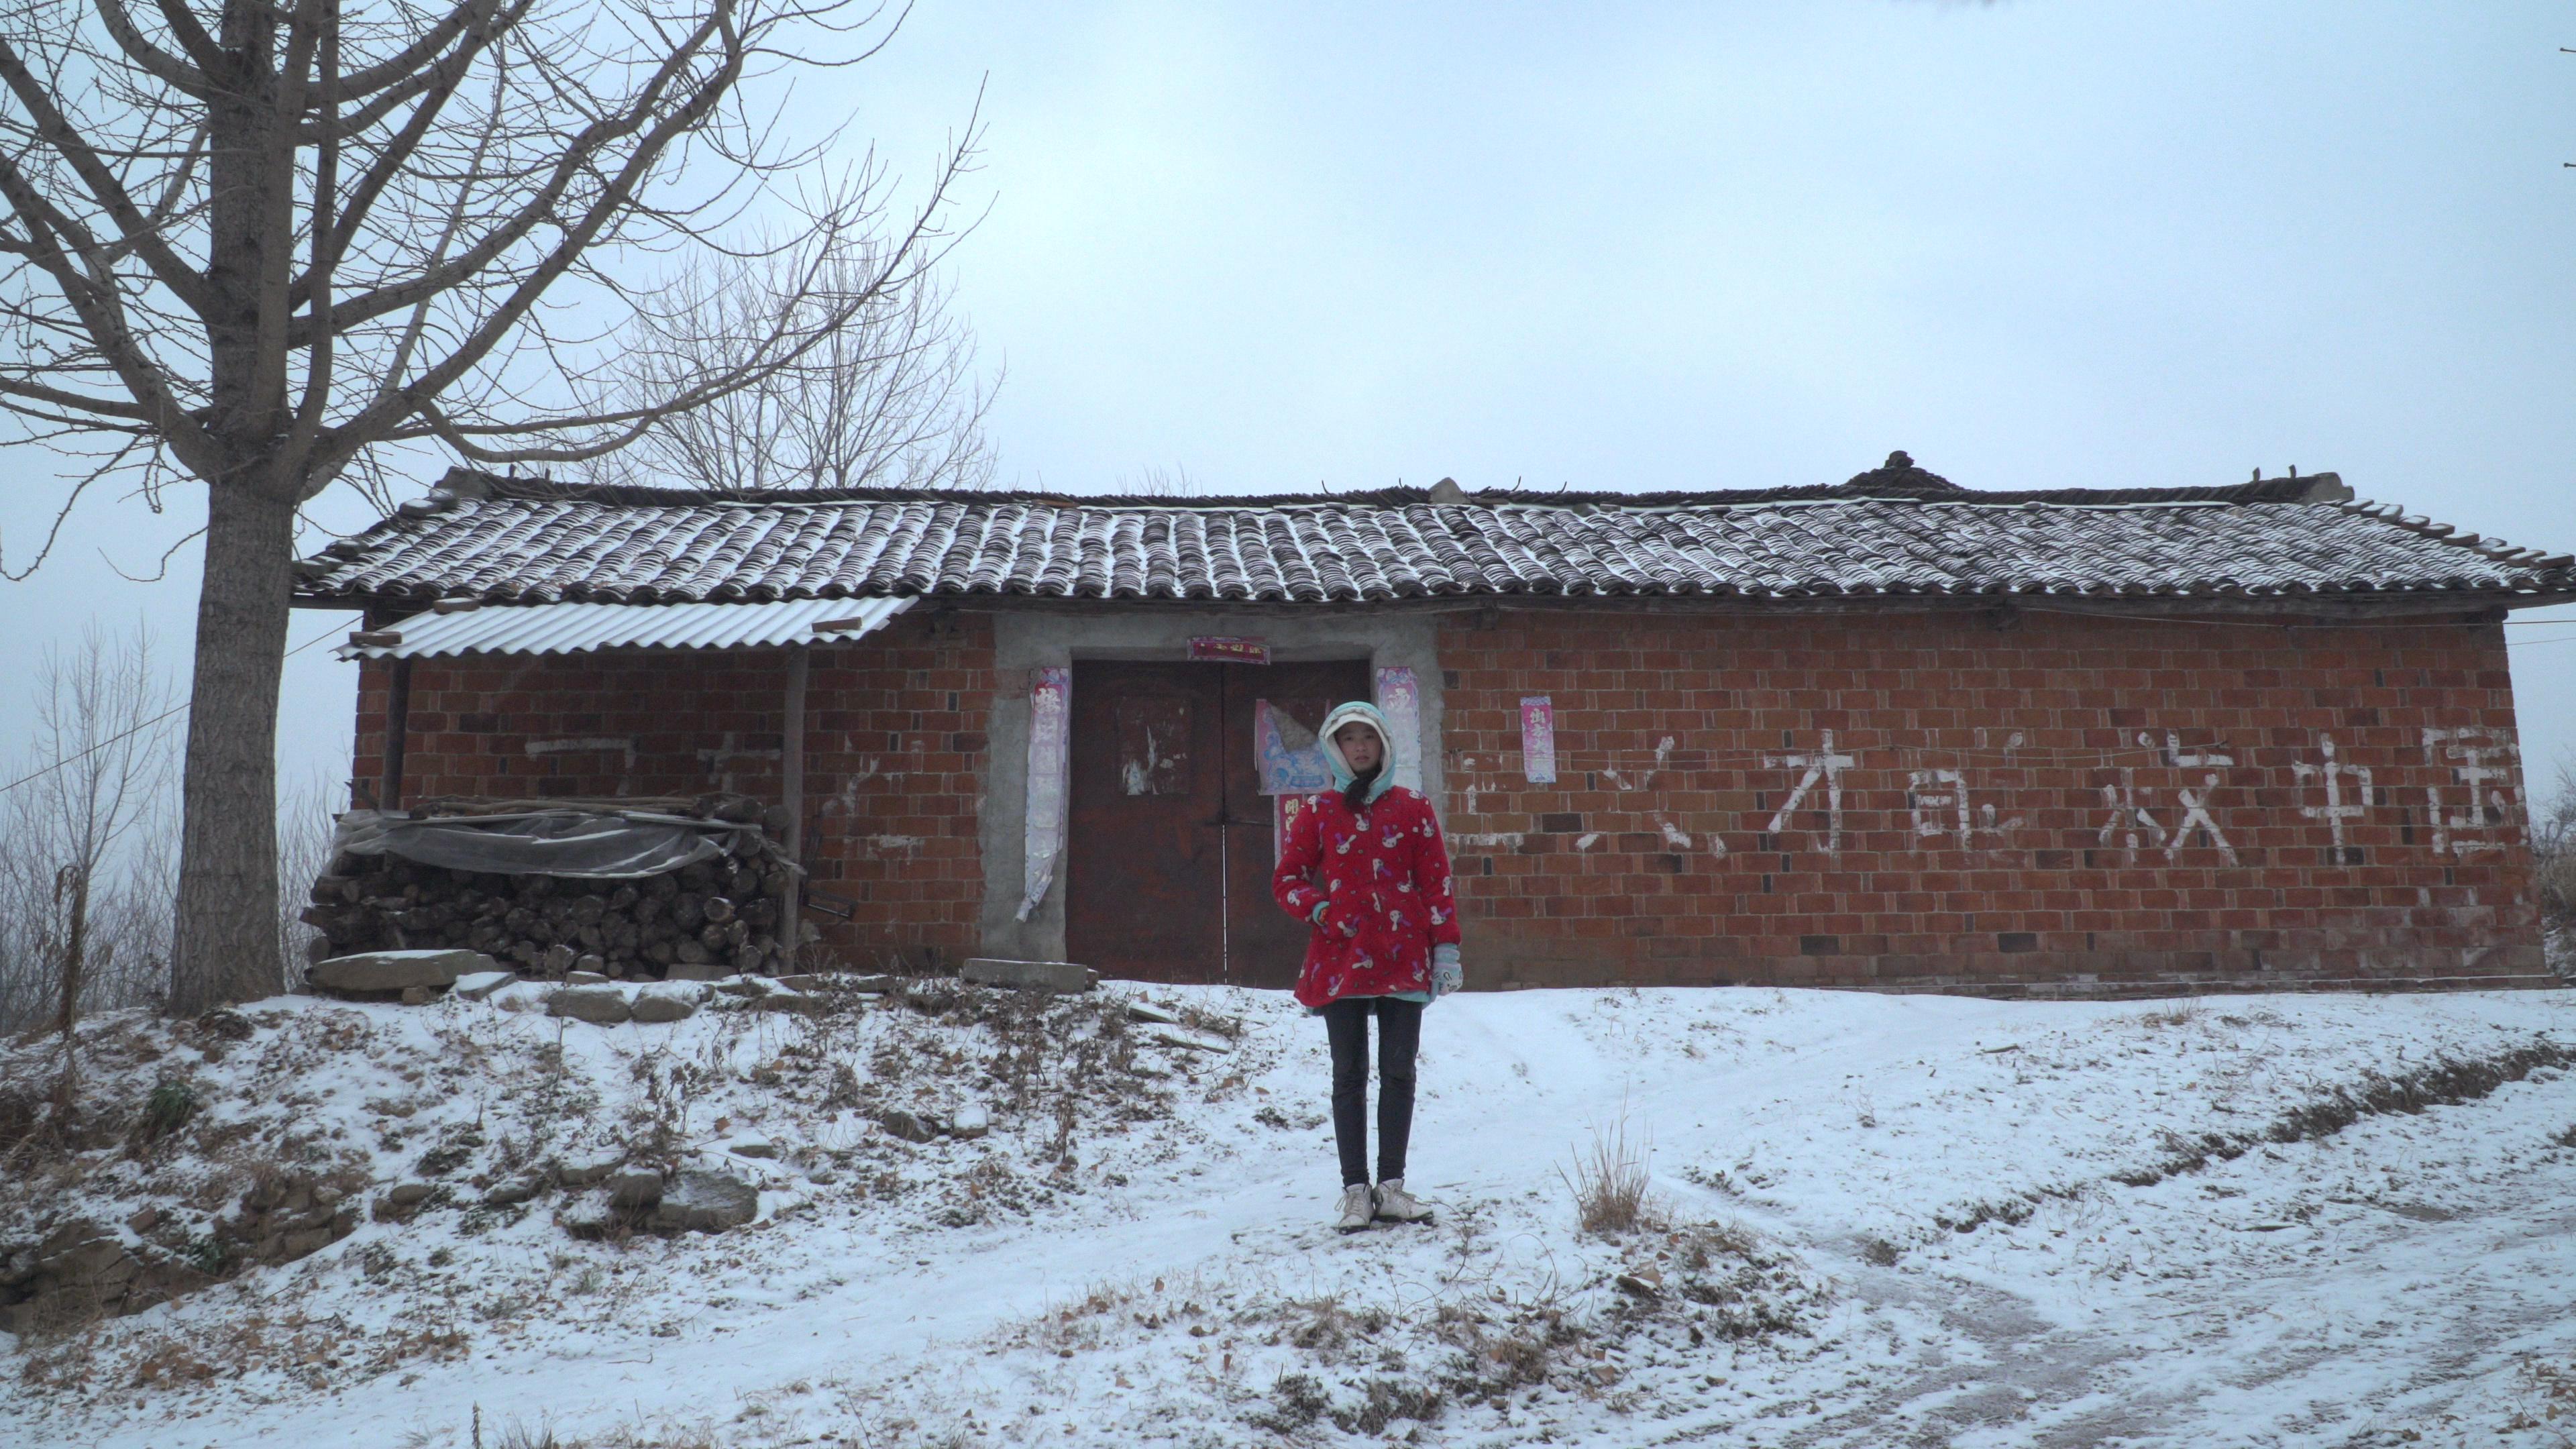 a figure stands in front a humble structure on snowy ground